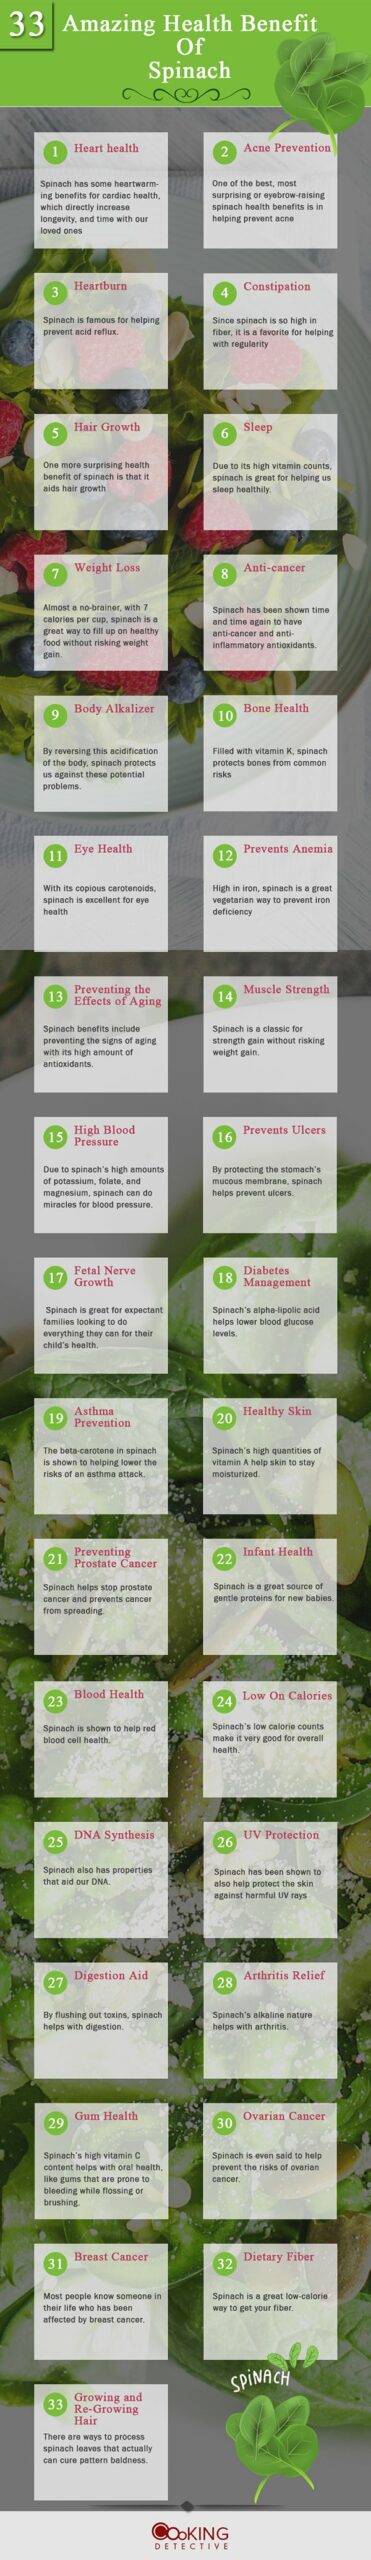 spinach-health-benefits-infographic